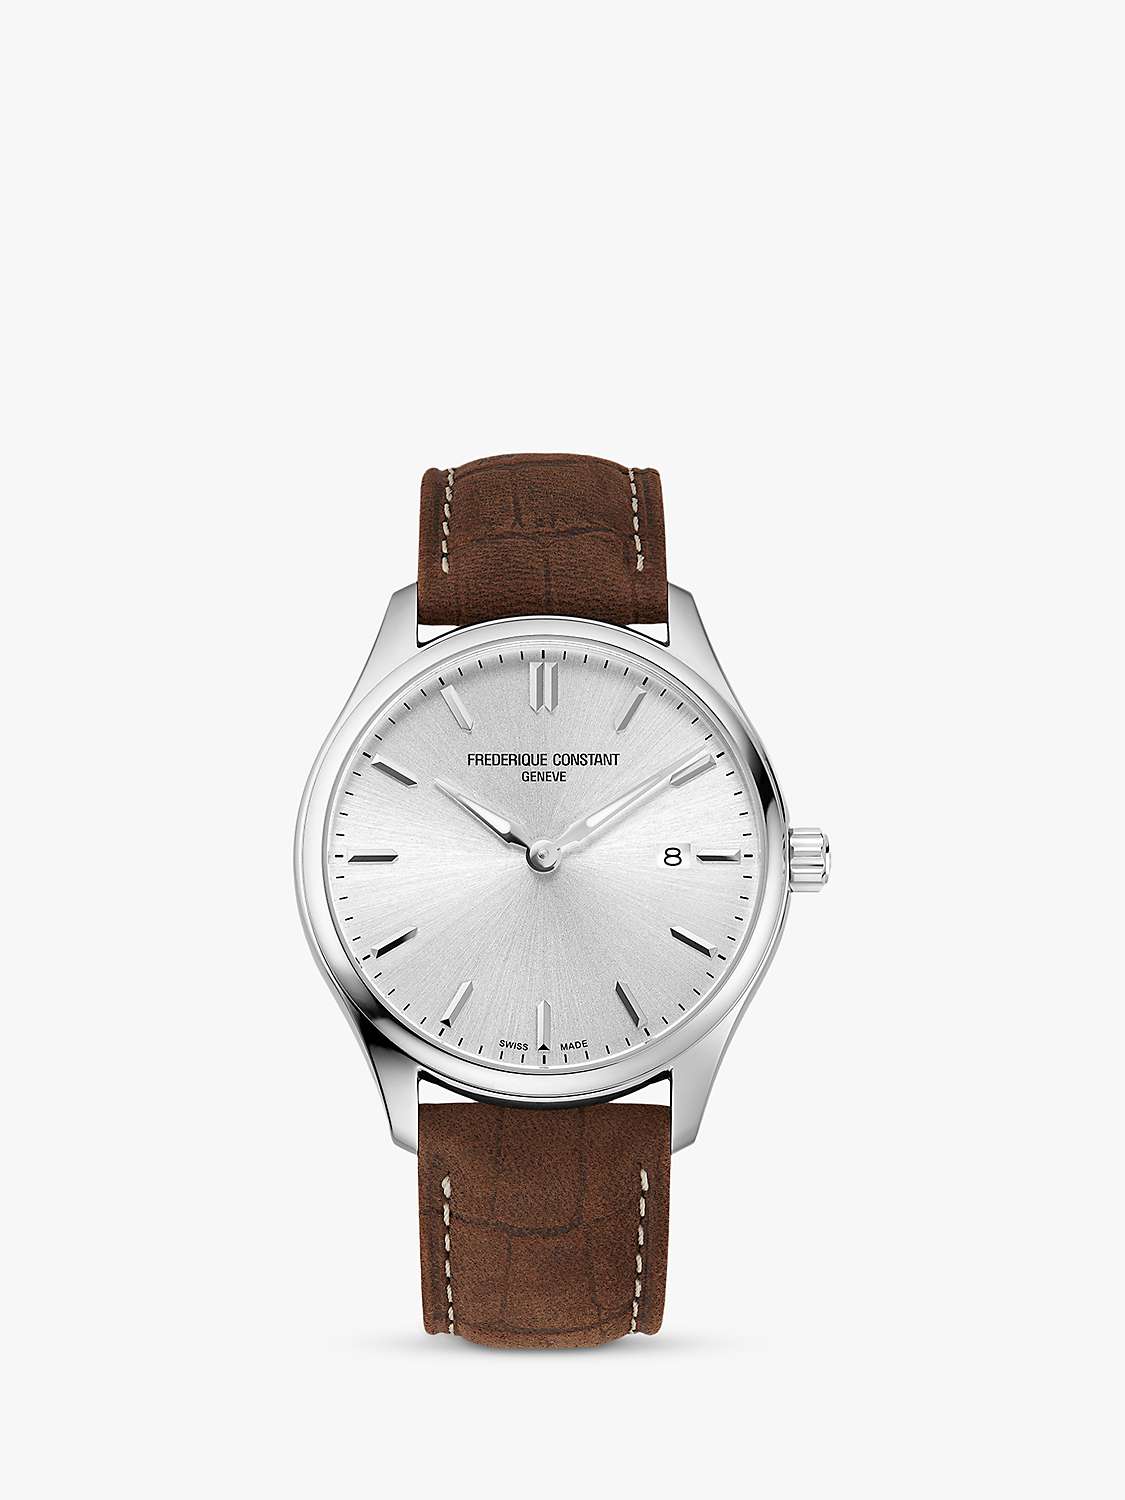 Buy Frederique Constant FC-220SS5B6 Men's Classics Date Leather Strap Watch, Brown/Silver Online at johnlewis.com